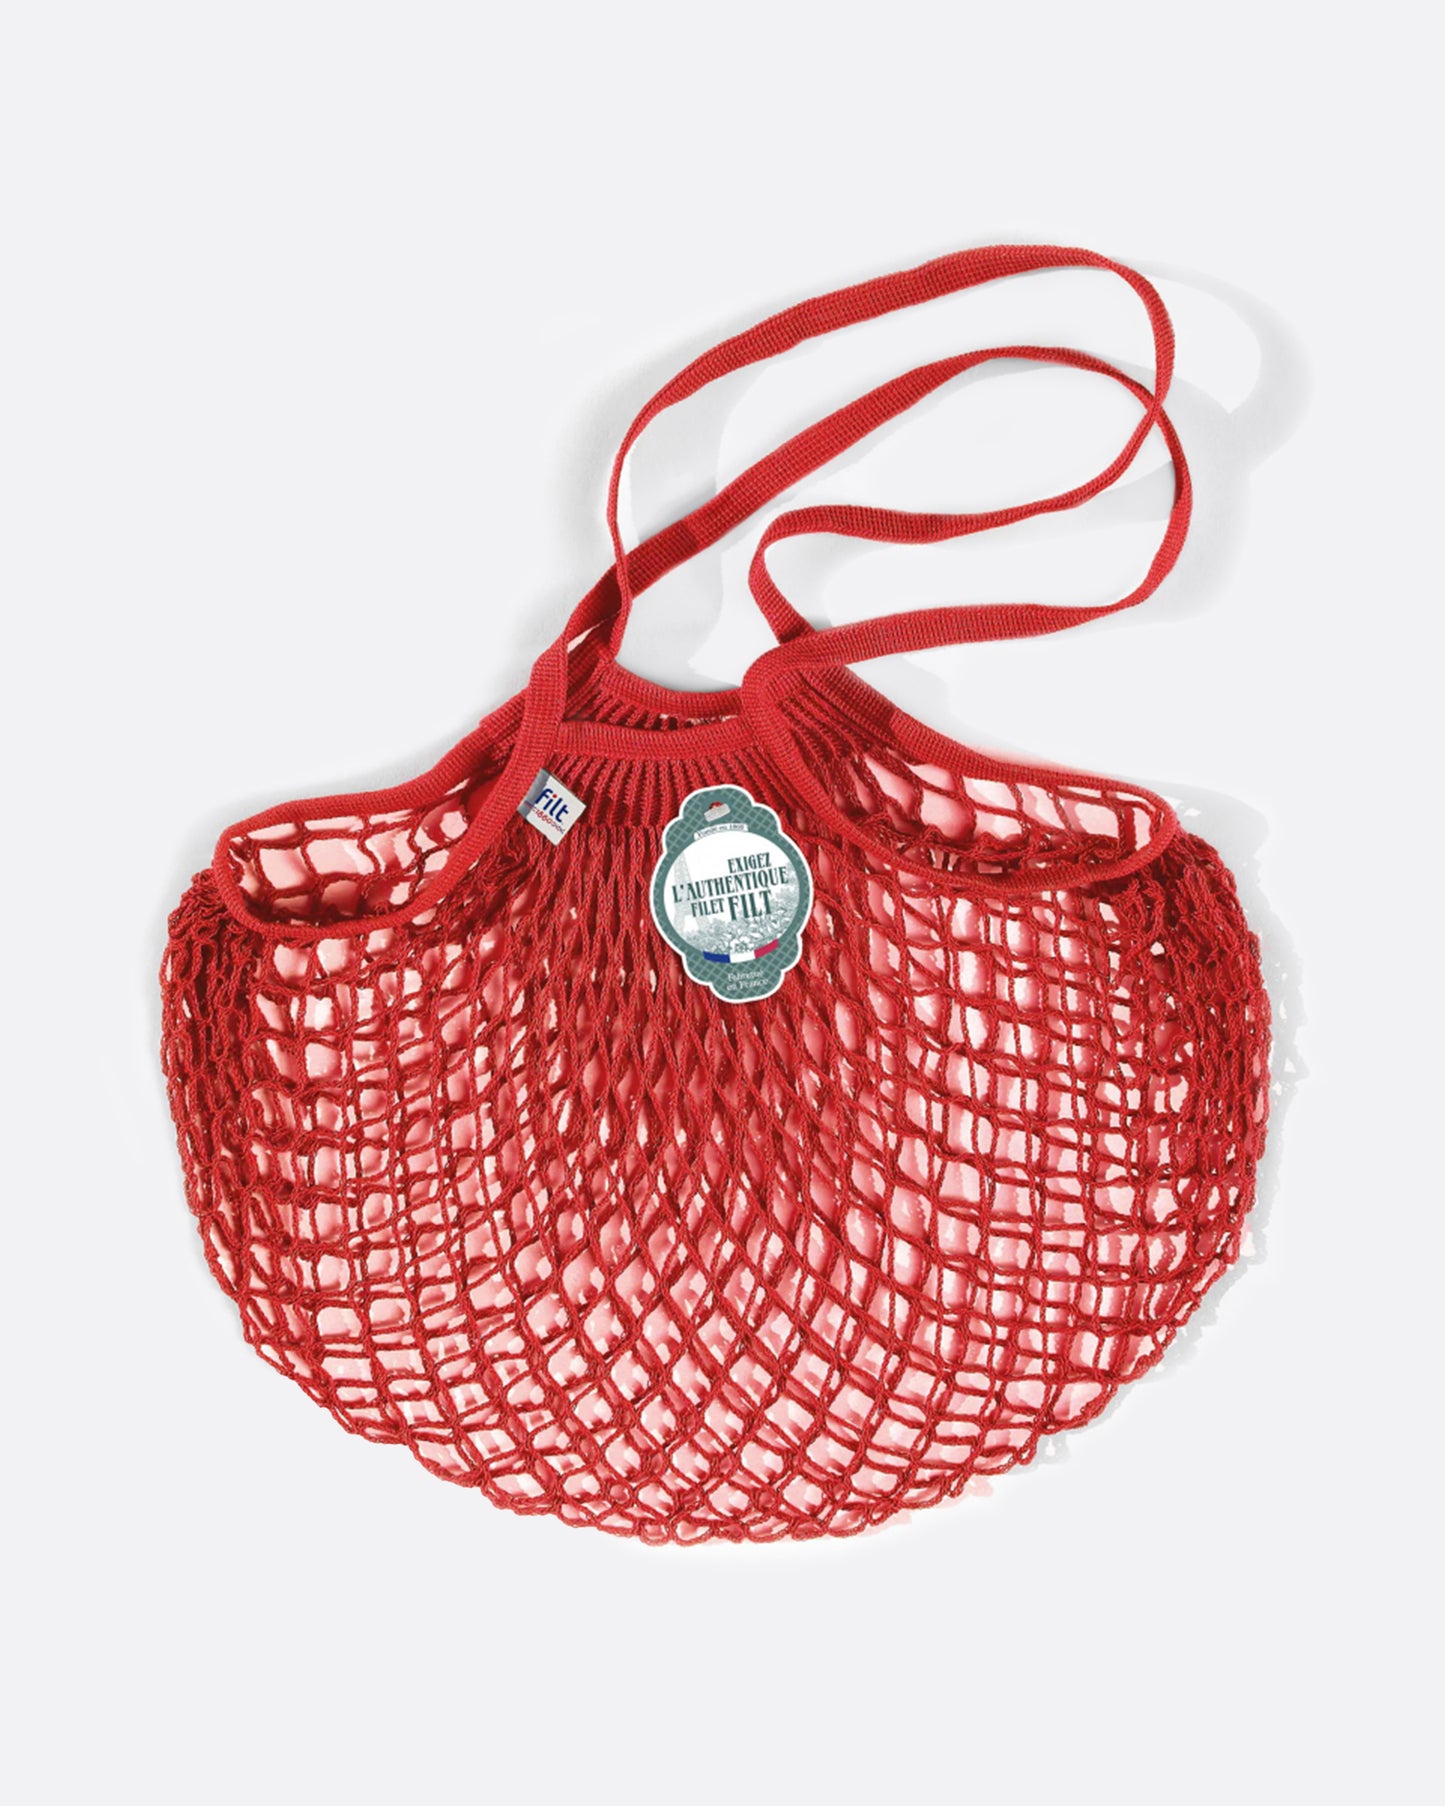 This coral-y red bag is perfect for the farmer's market.